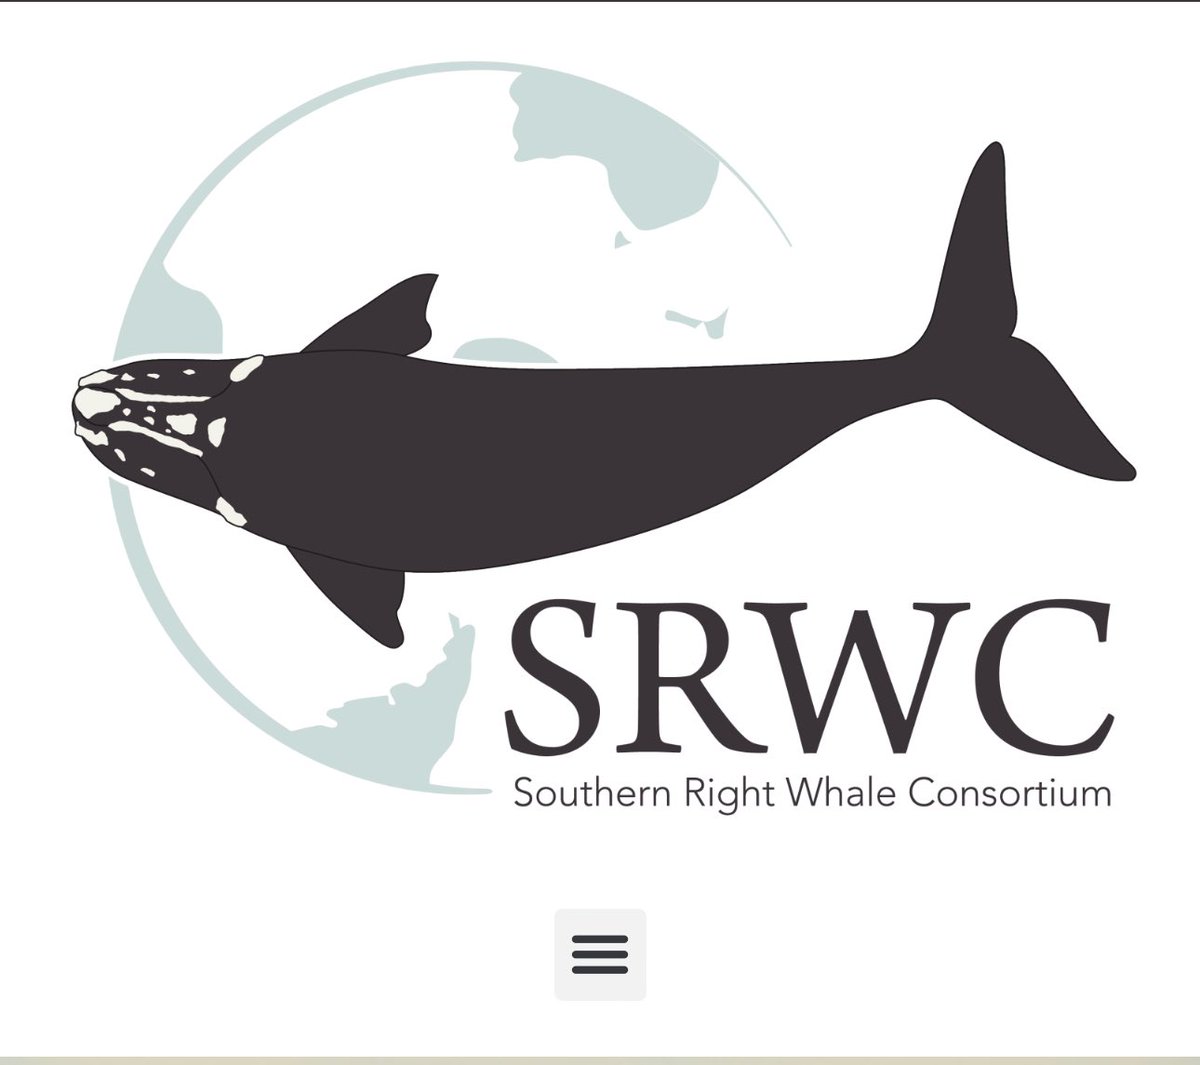 The Southern Right Whale Consortium website is up! It’s so exciting to see the results from different projects together in one place. I’m proud to be able to contribute to the research and collaborate with the team! 
#southernrightwhale
southernrightwhaleconsortium.org